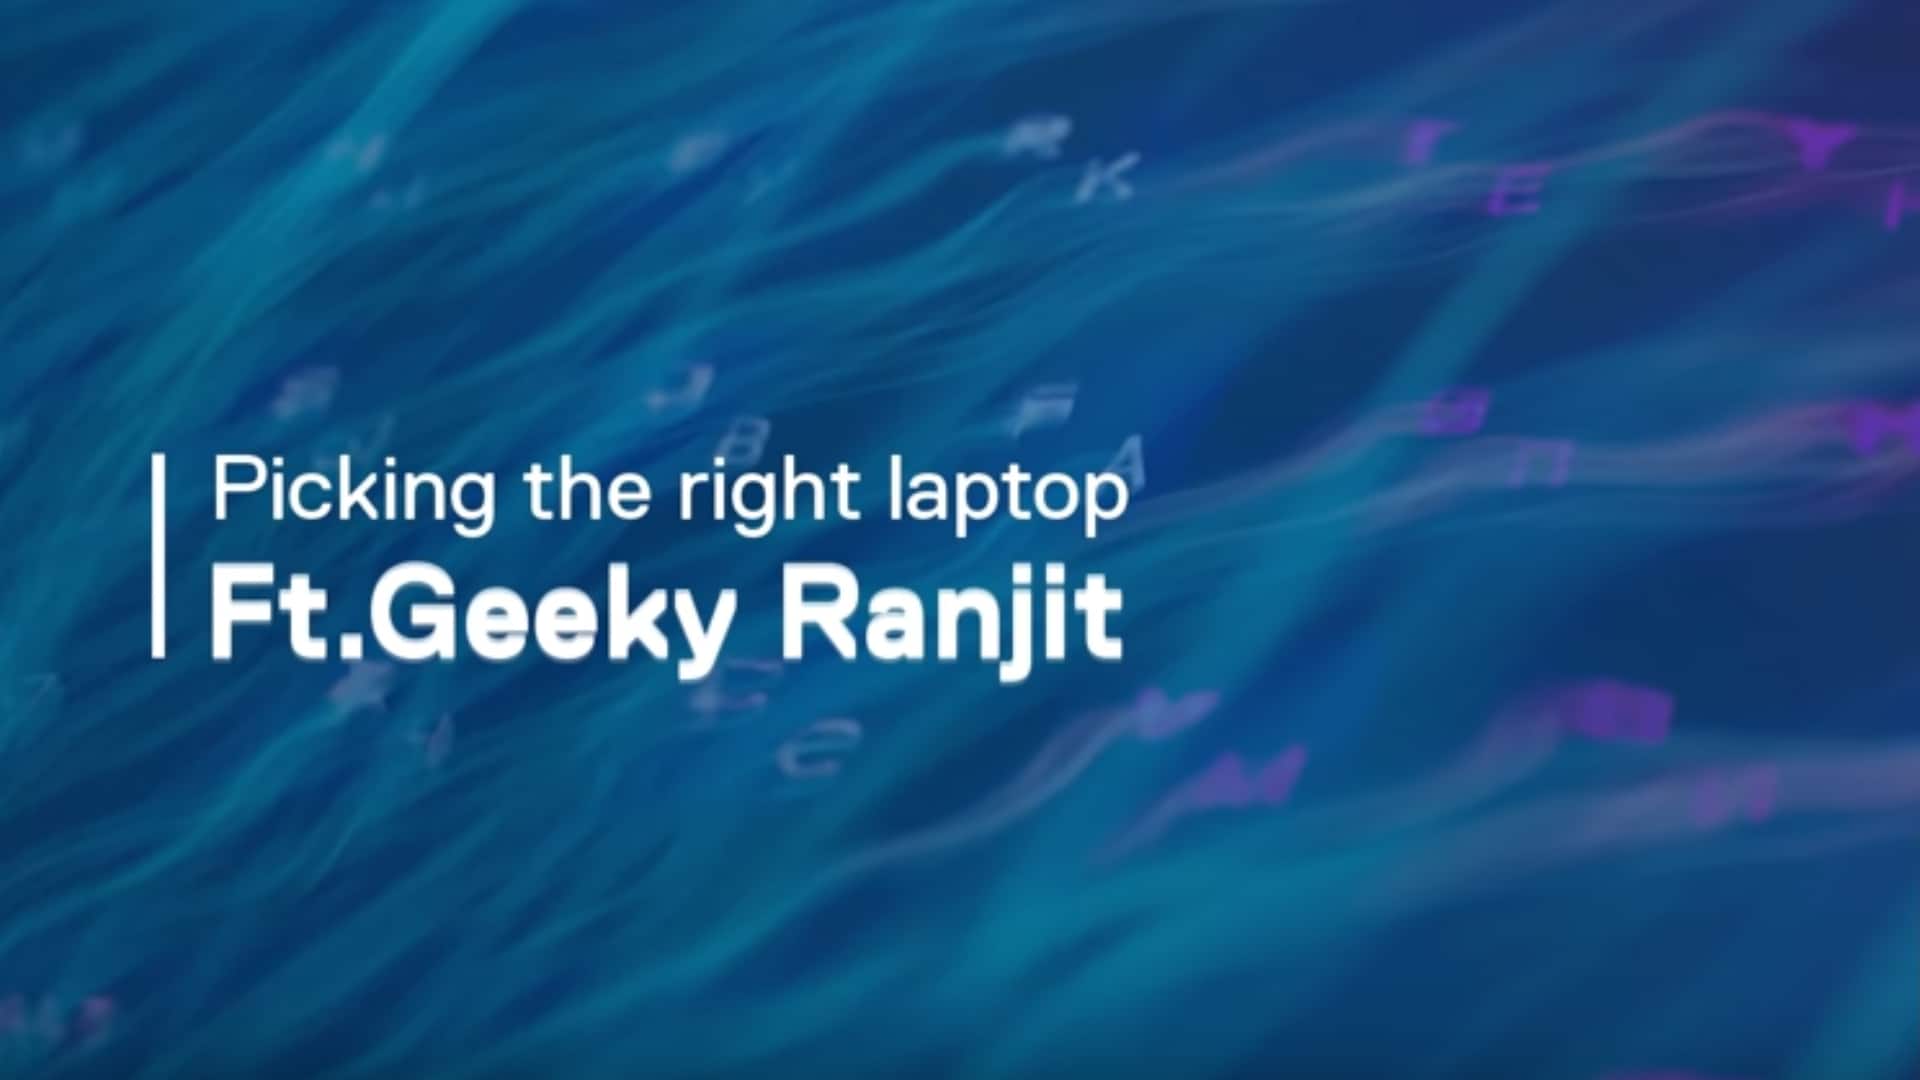 Picking the right laptop | Techsplained ft. Geeky Ranjit | Dell | Powered by Intel